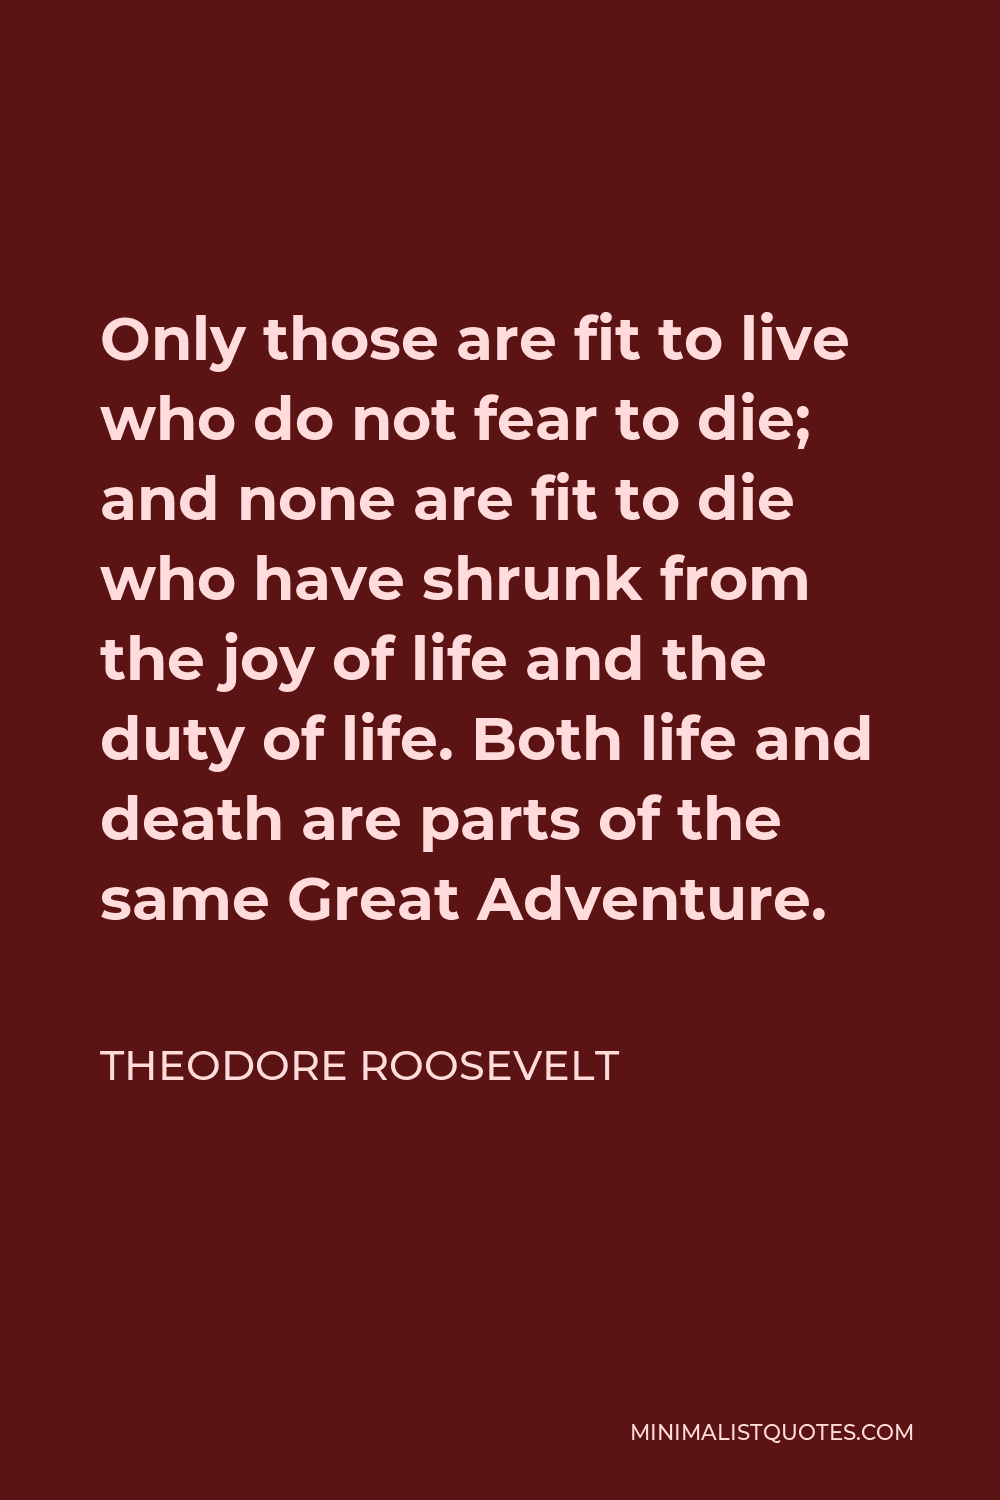 Theodore Roosevelt Quote - Only those are fit to live who do not fear to die; and none are fit to die who have shrunk from the joy of life and the duty of life. Both life and death are parts of the same Great Adventure.